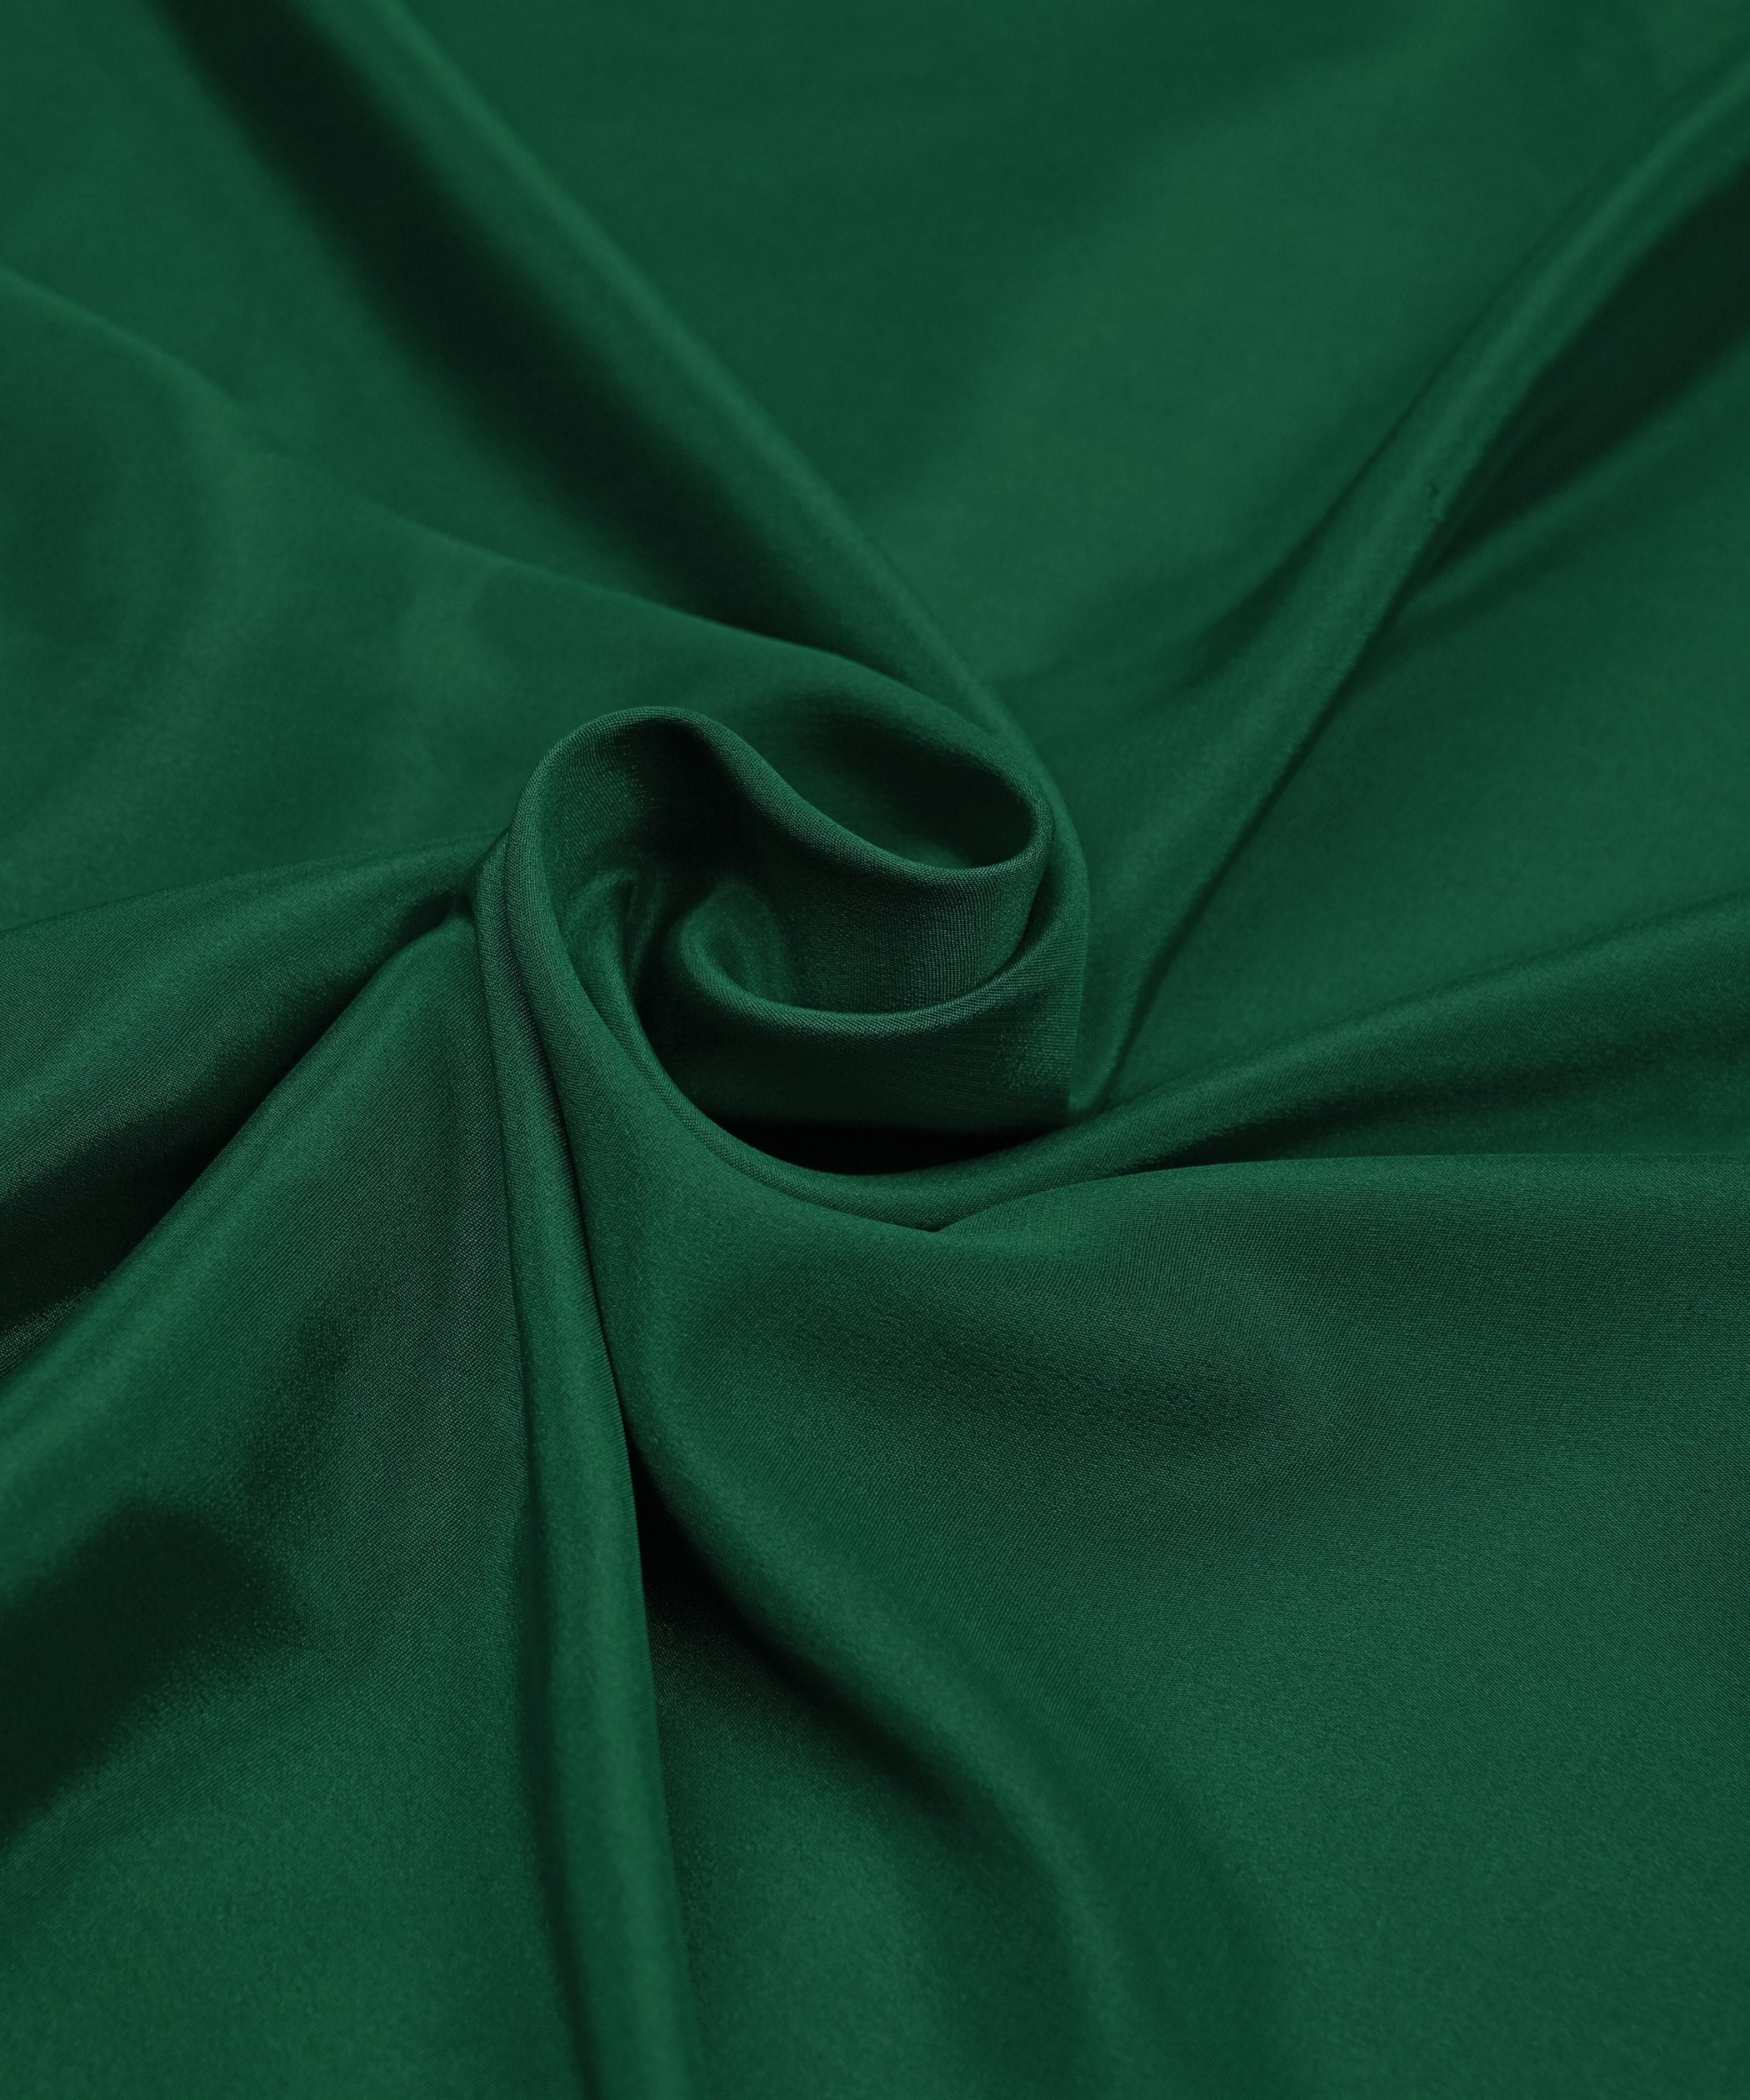 Green Plain Dyed Crepe Fabric